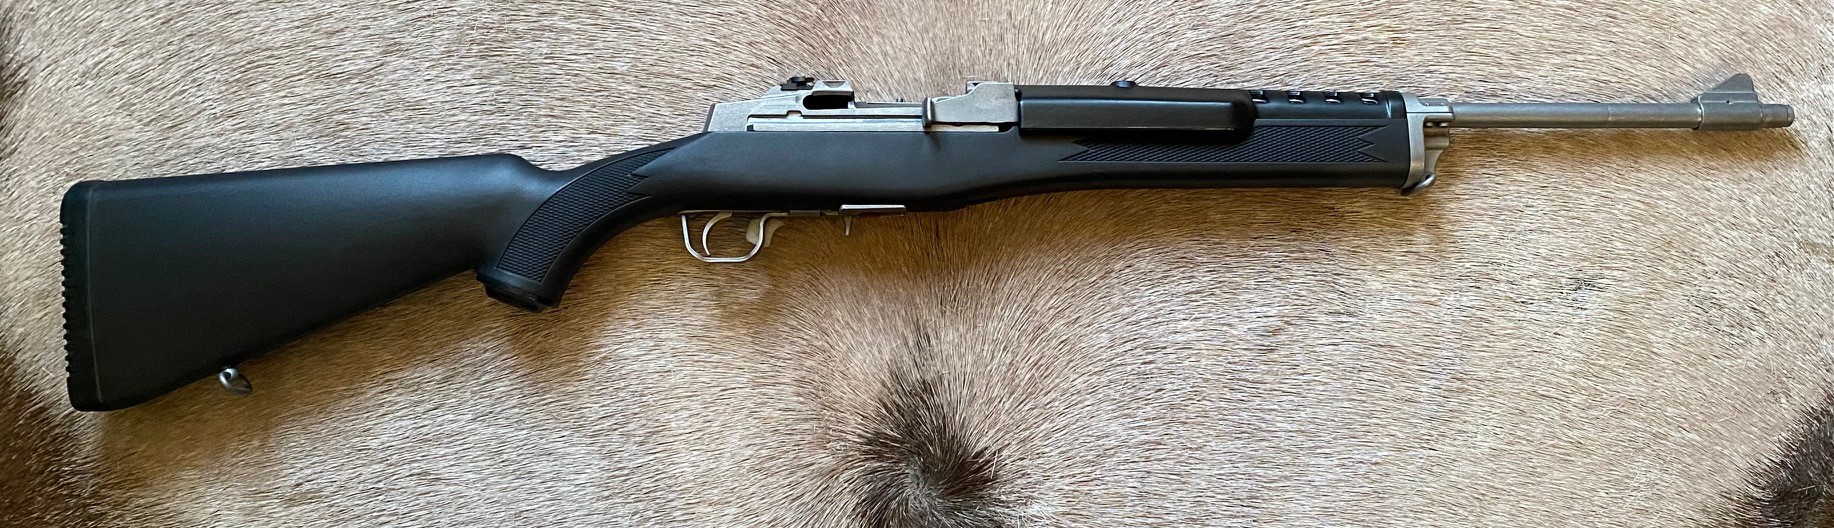 Ruger Mini-14 Ranch Rifle - 196 Series